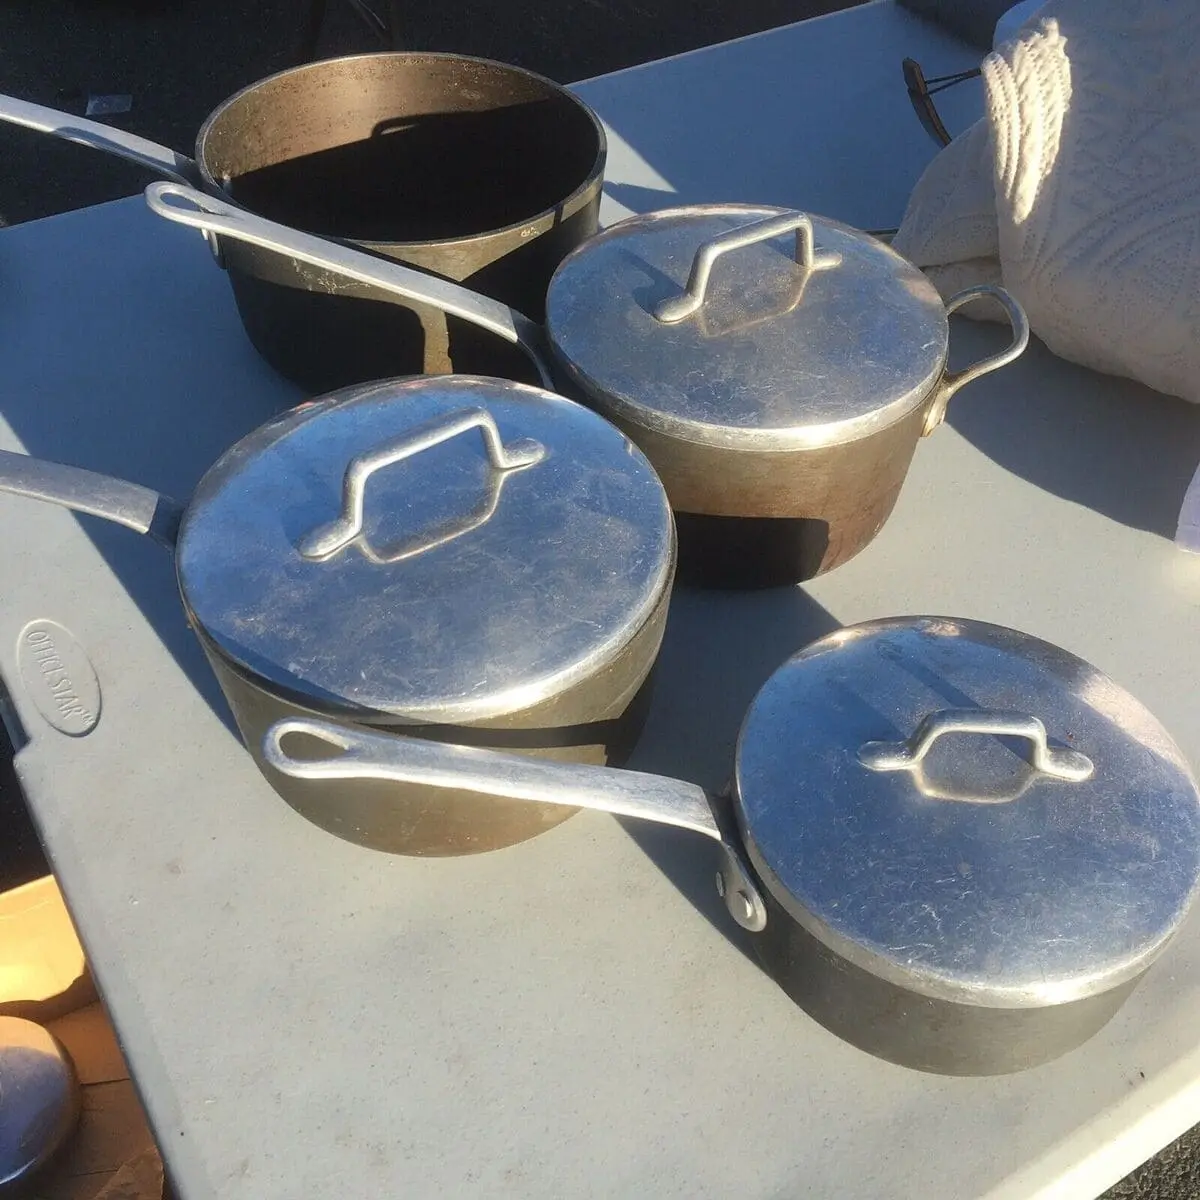 How to Restore Magnalite Professional Cookware